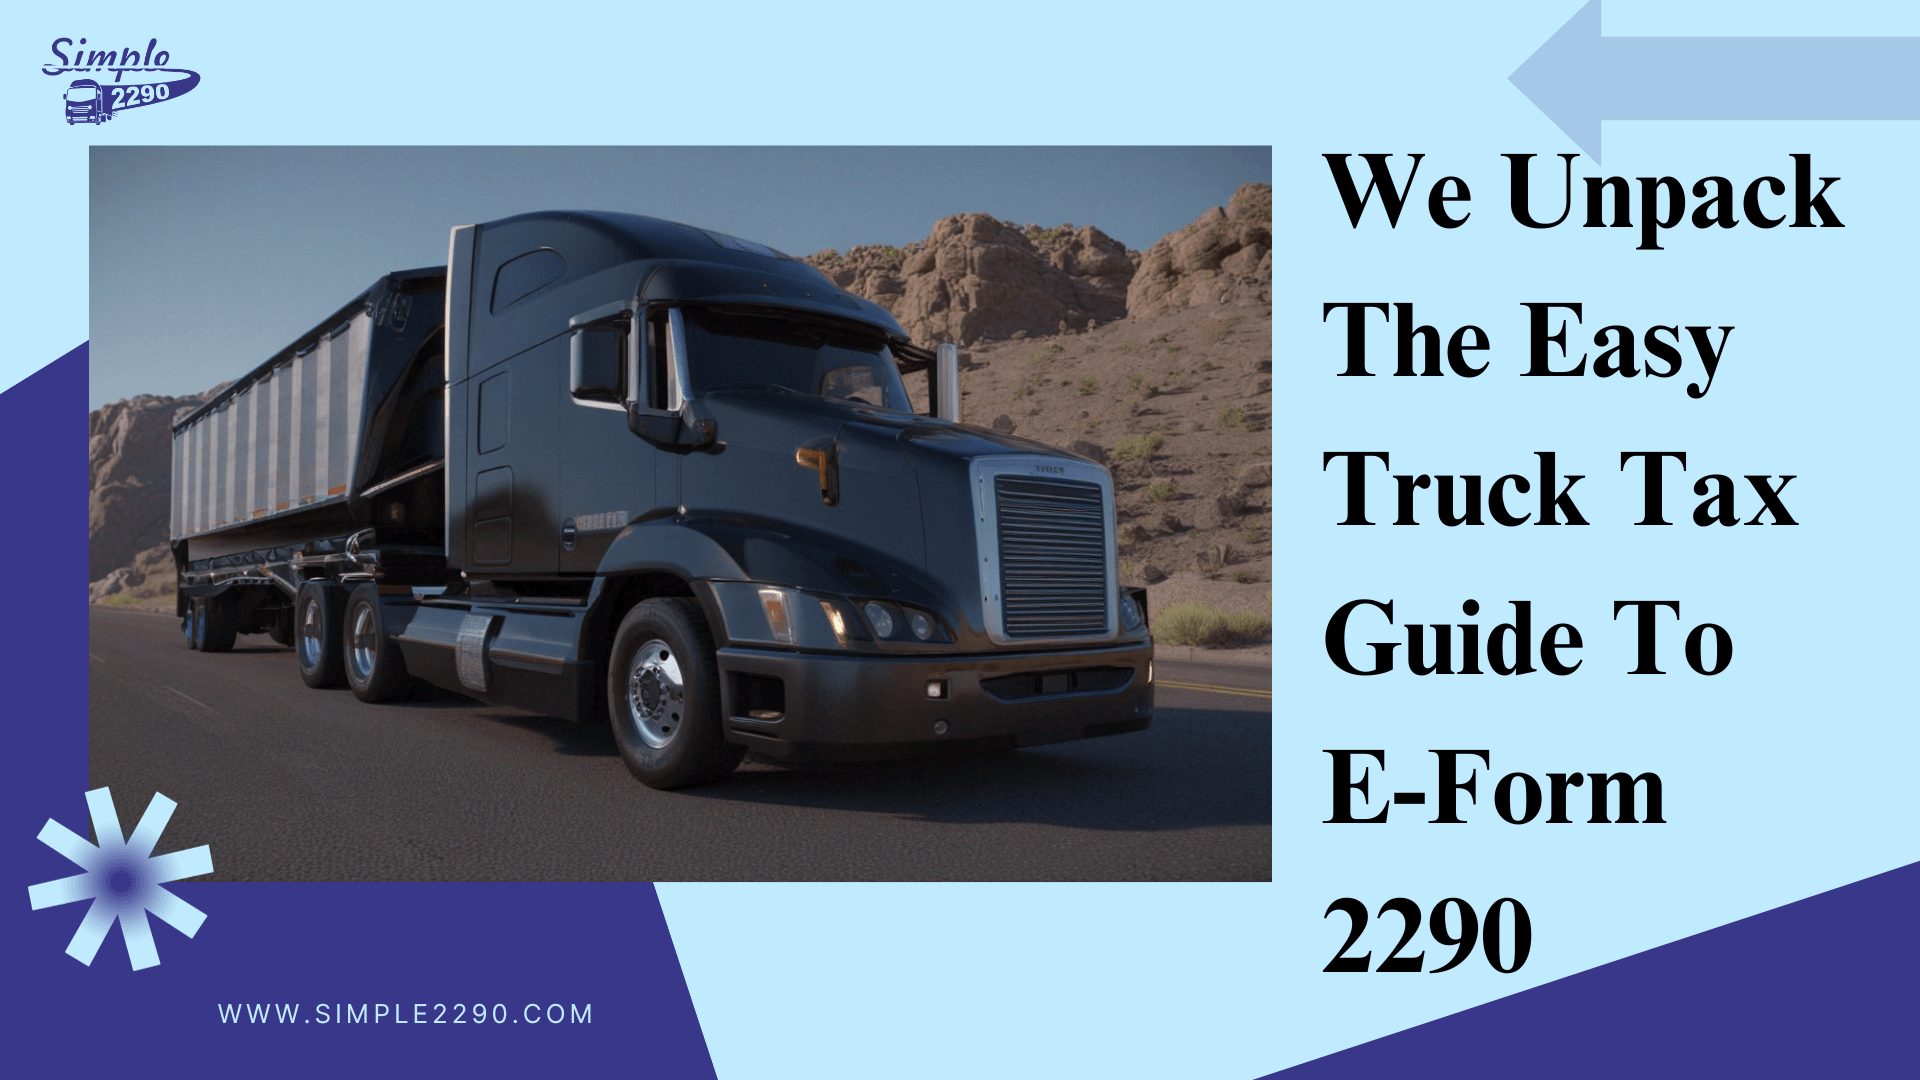 We Unpack The Simple Truck Tax Guide To E-Form 2290